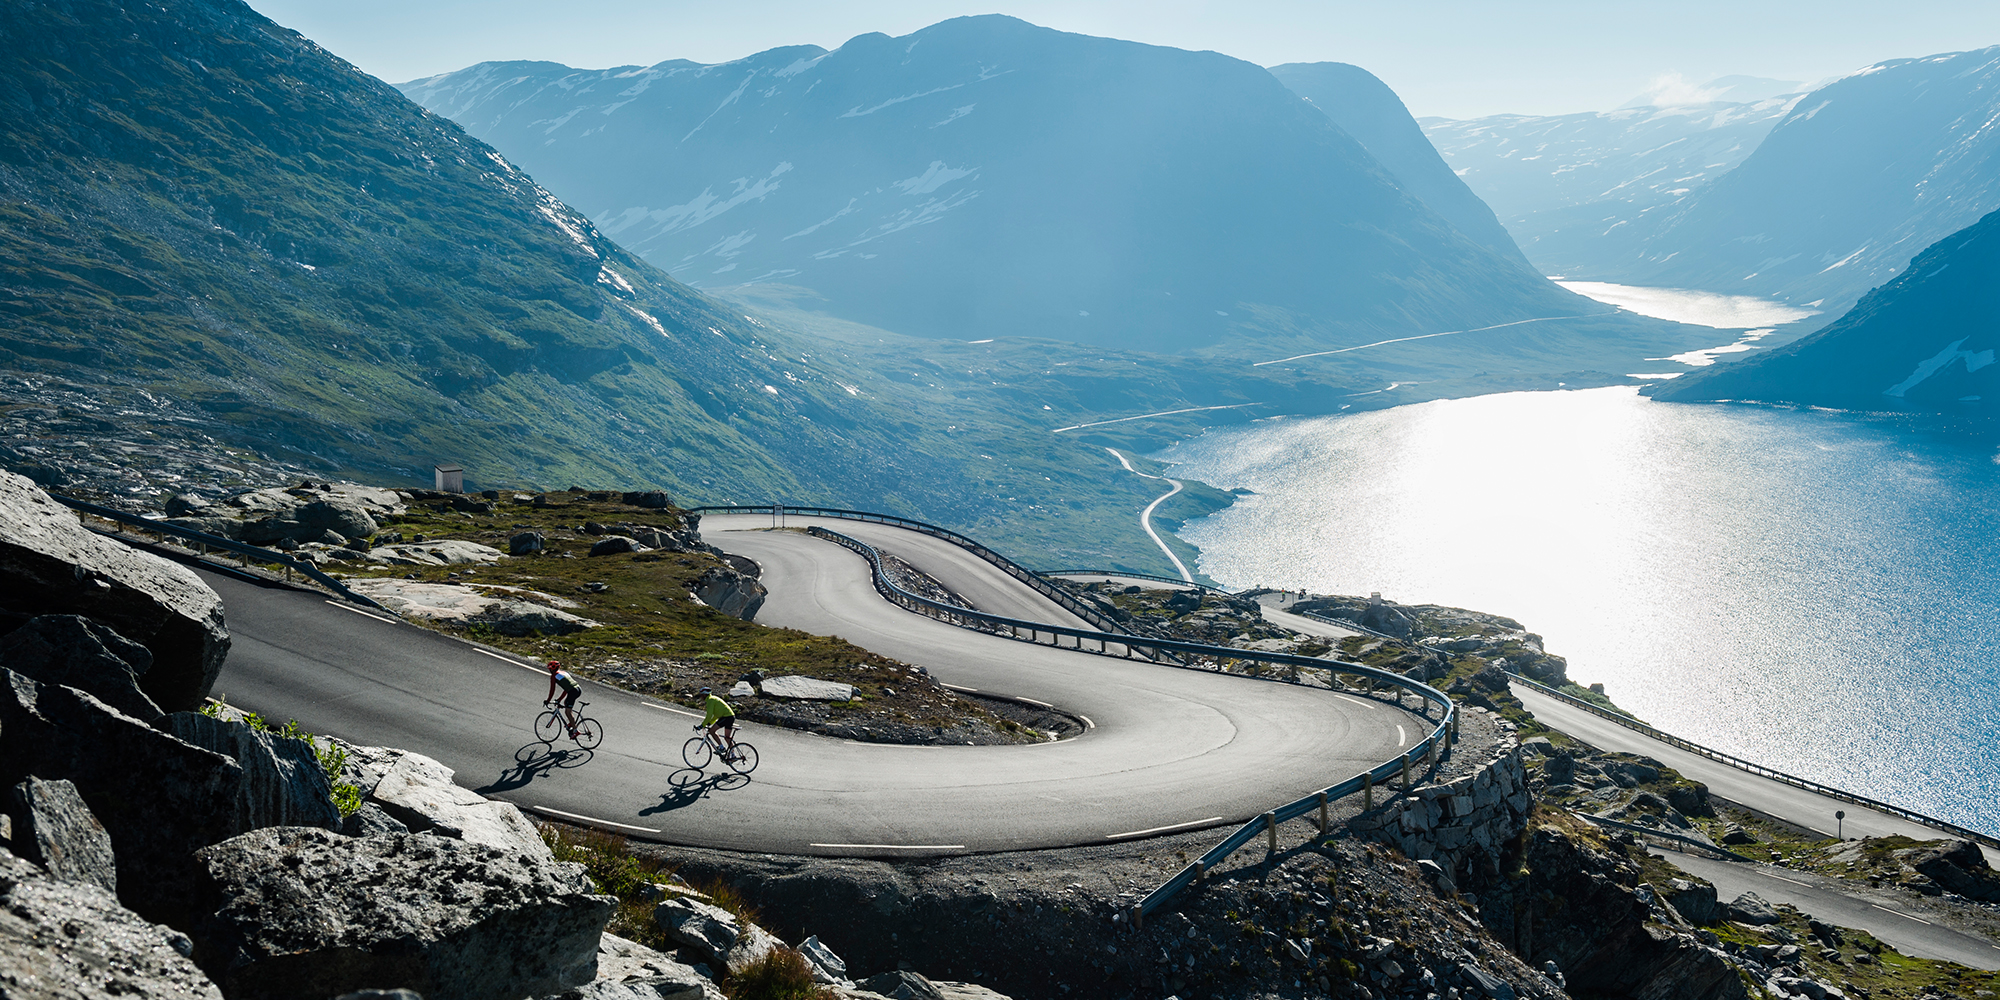 road-cycling-geirangerfjord-norway-2-1_70f1a01e-c7c9-4d44-a1fc-10161193fdc8.jpg